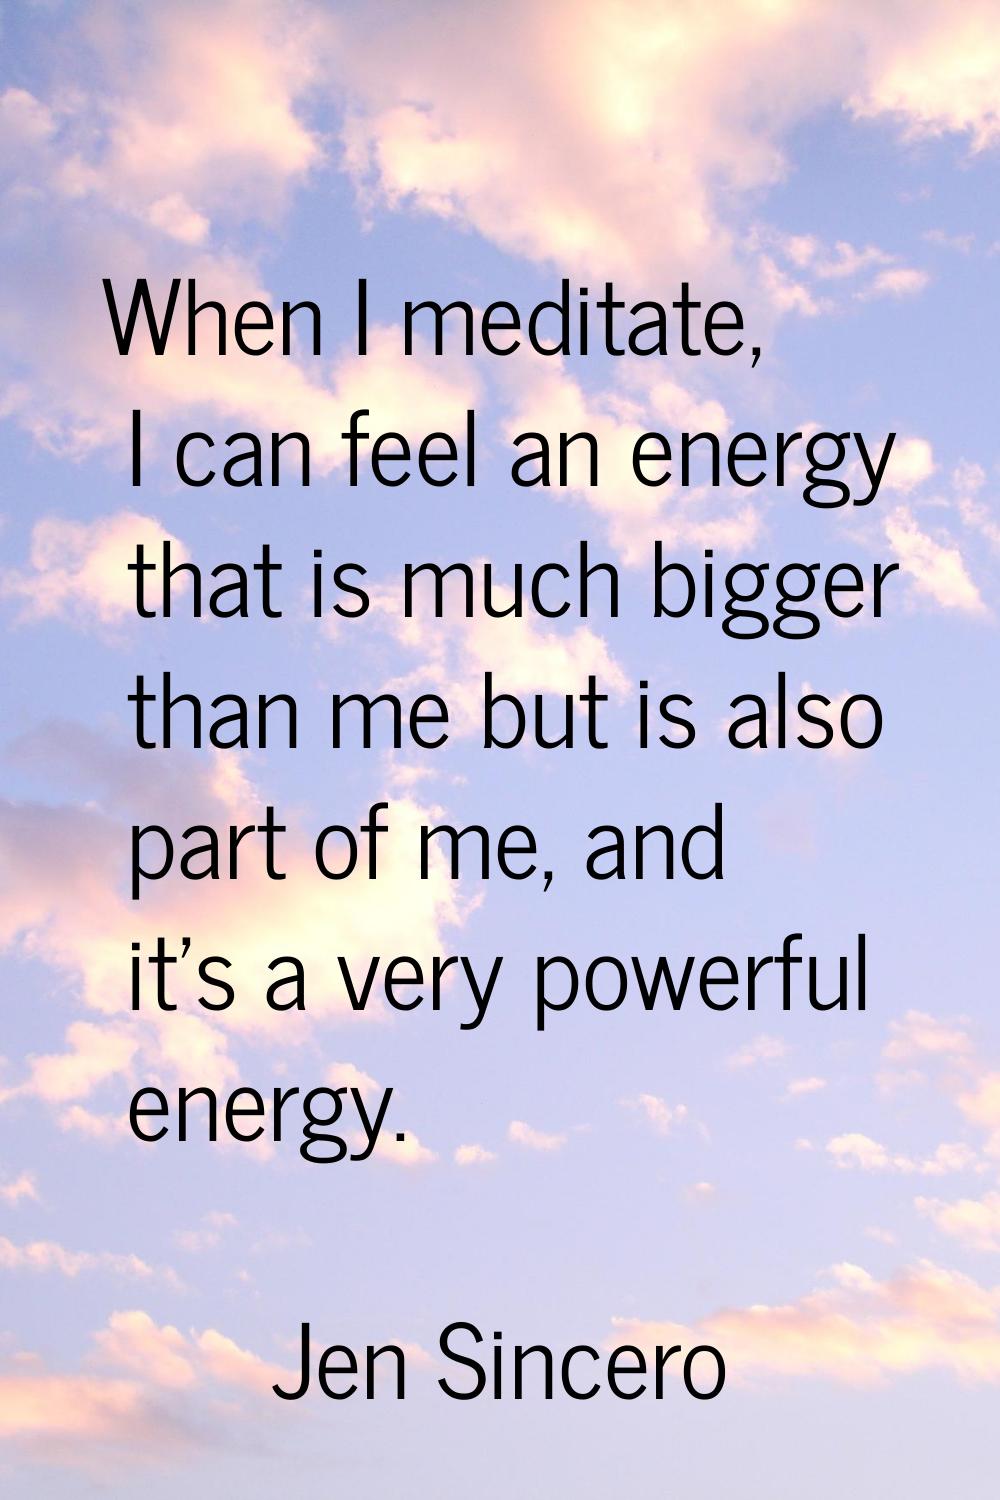 When I meditate, I can feel an energy that is much bigger than me but is also part of me, and it's 